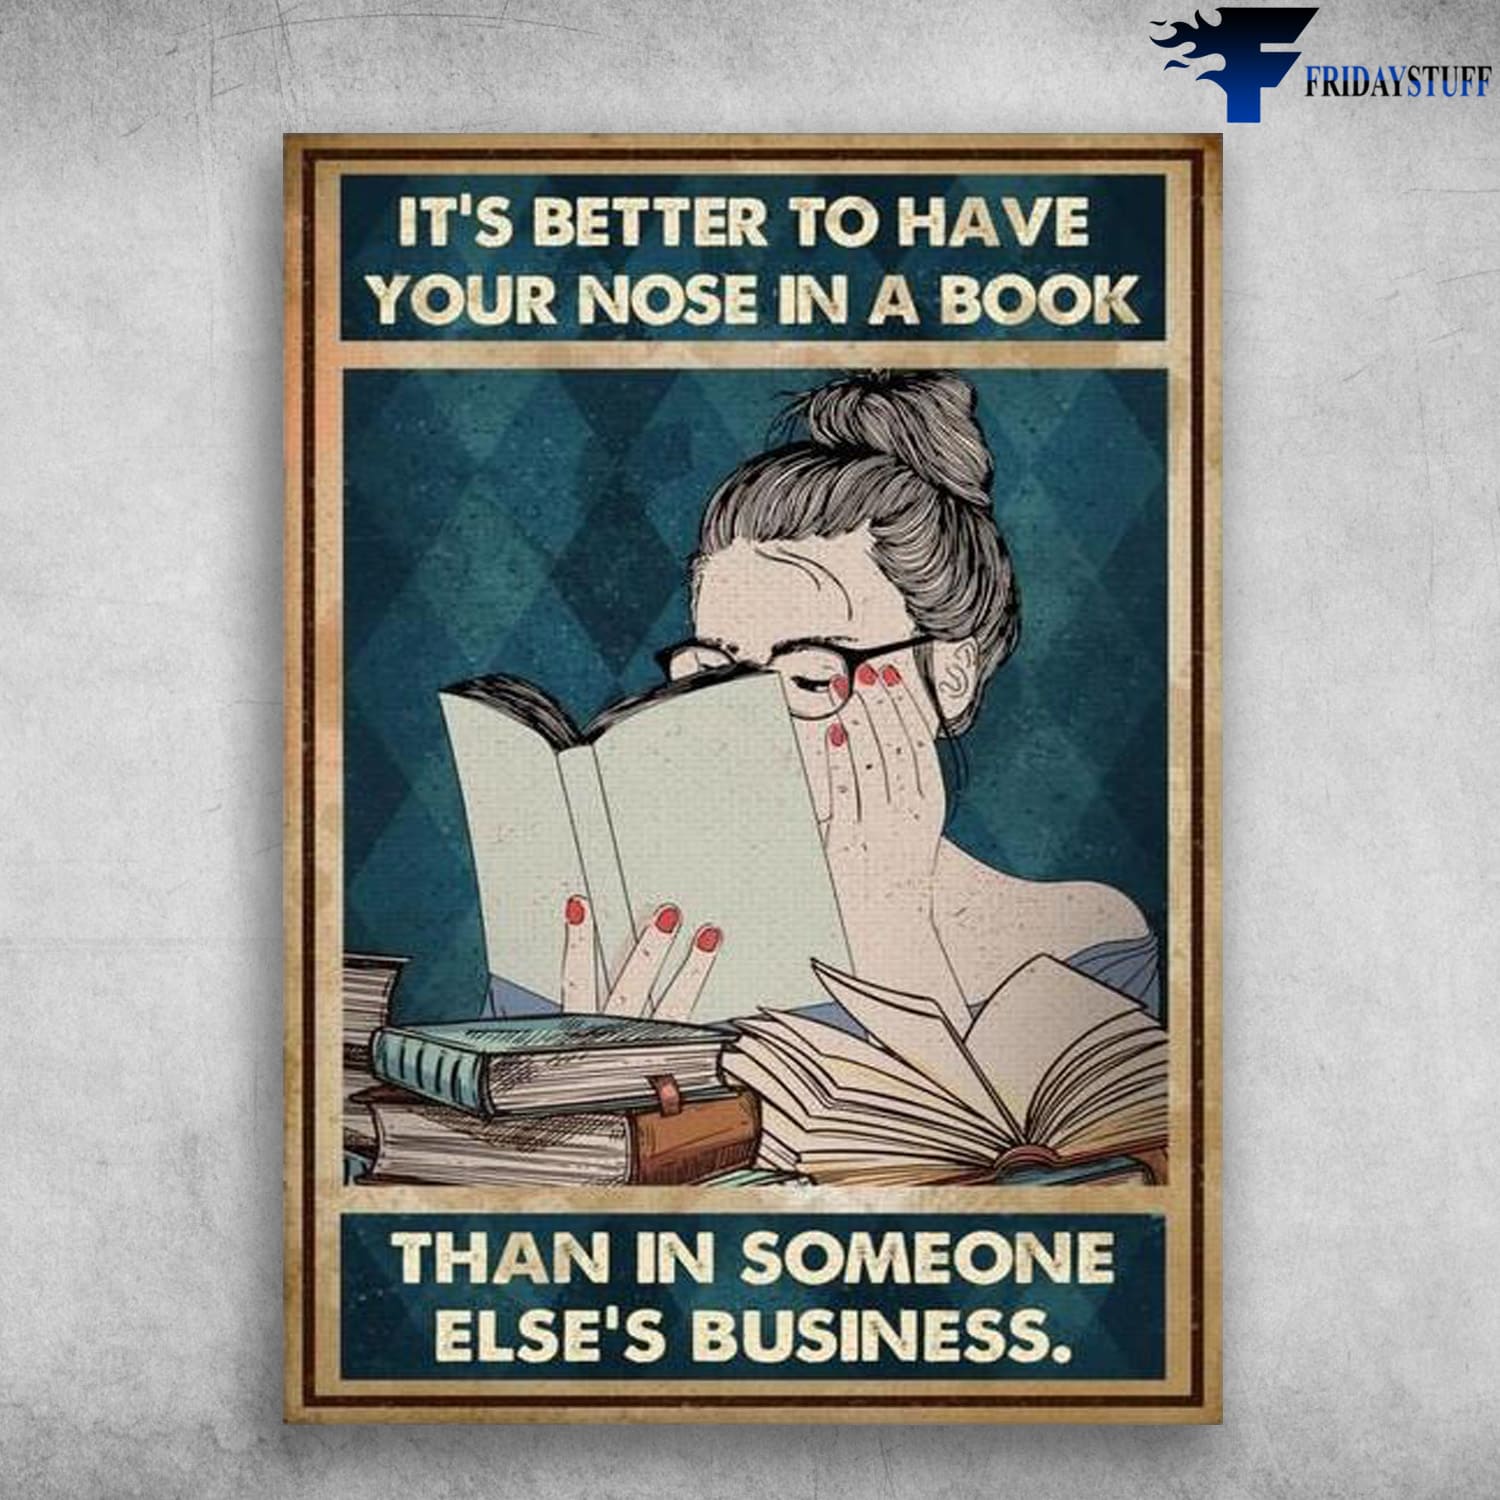 Girl Loves Book, Book Lover, It's Better To Have Your Nose In A Book, Than In Someone Else's Business